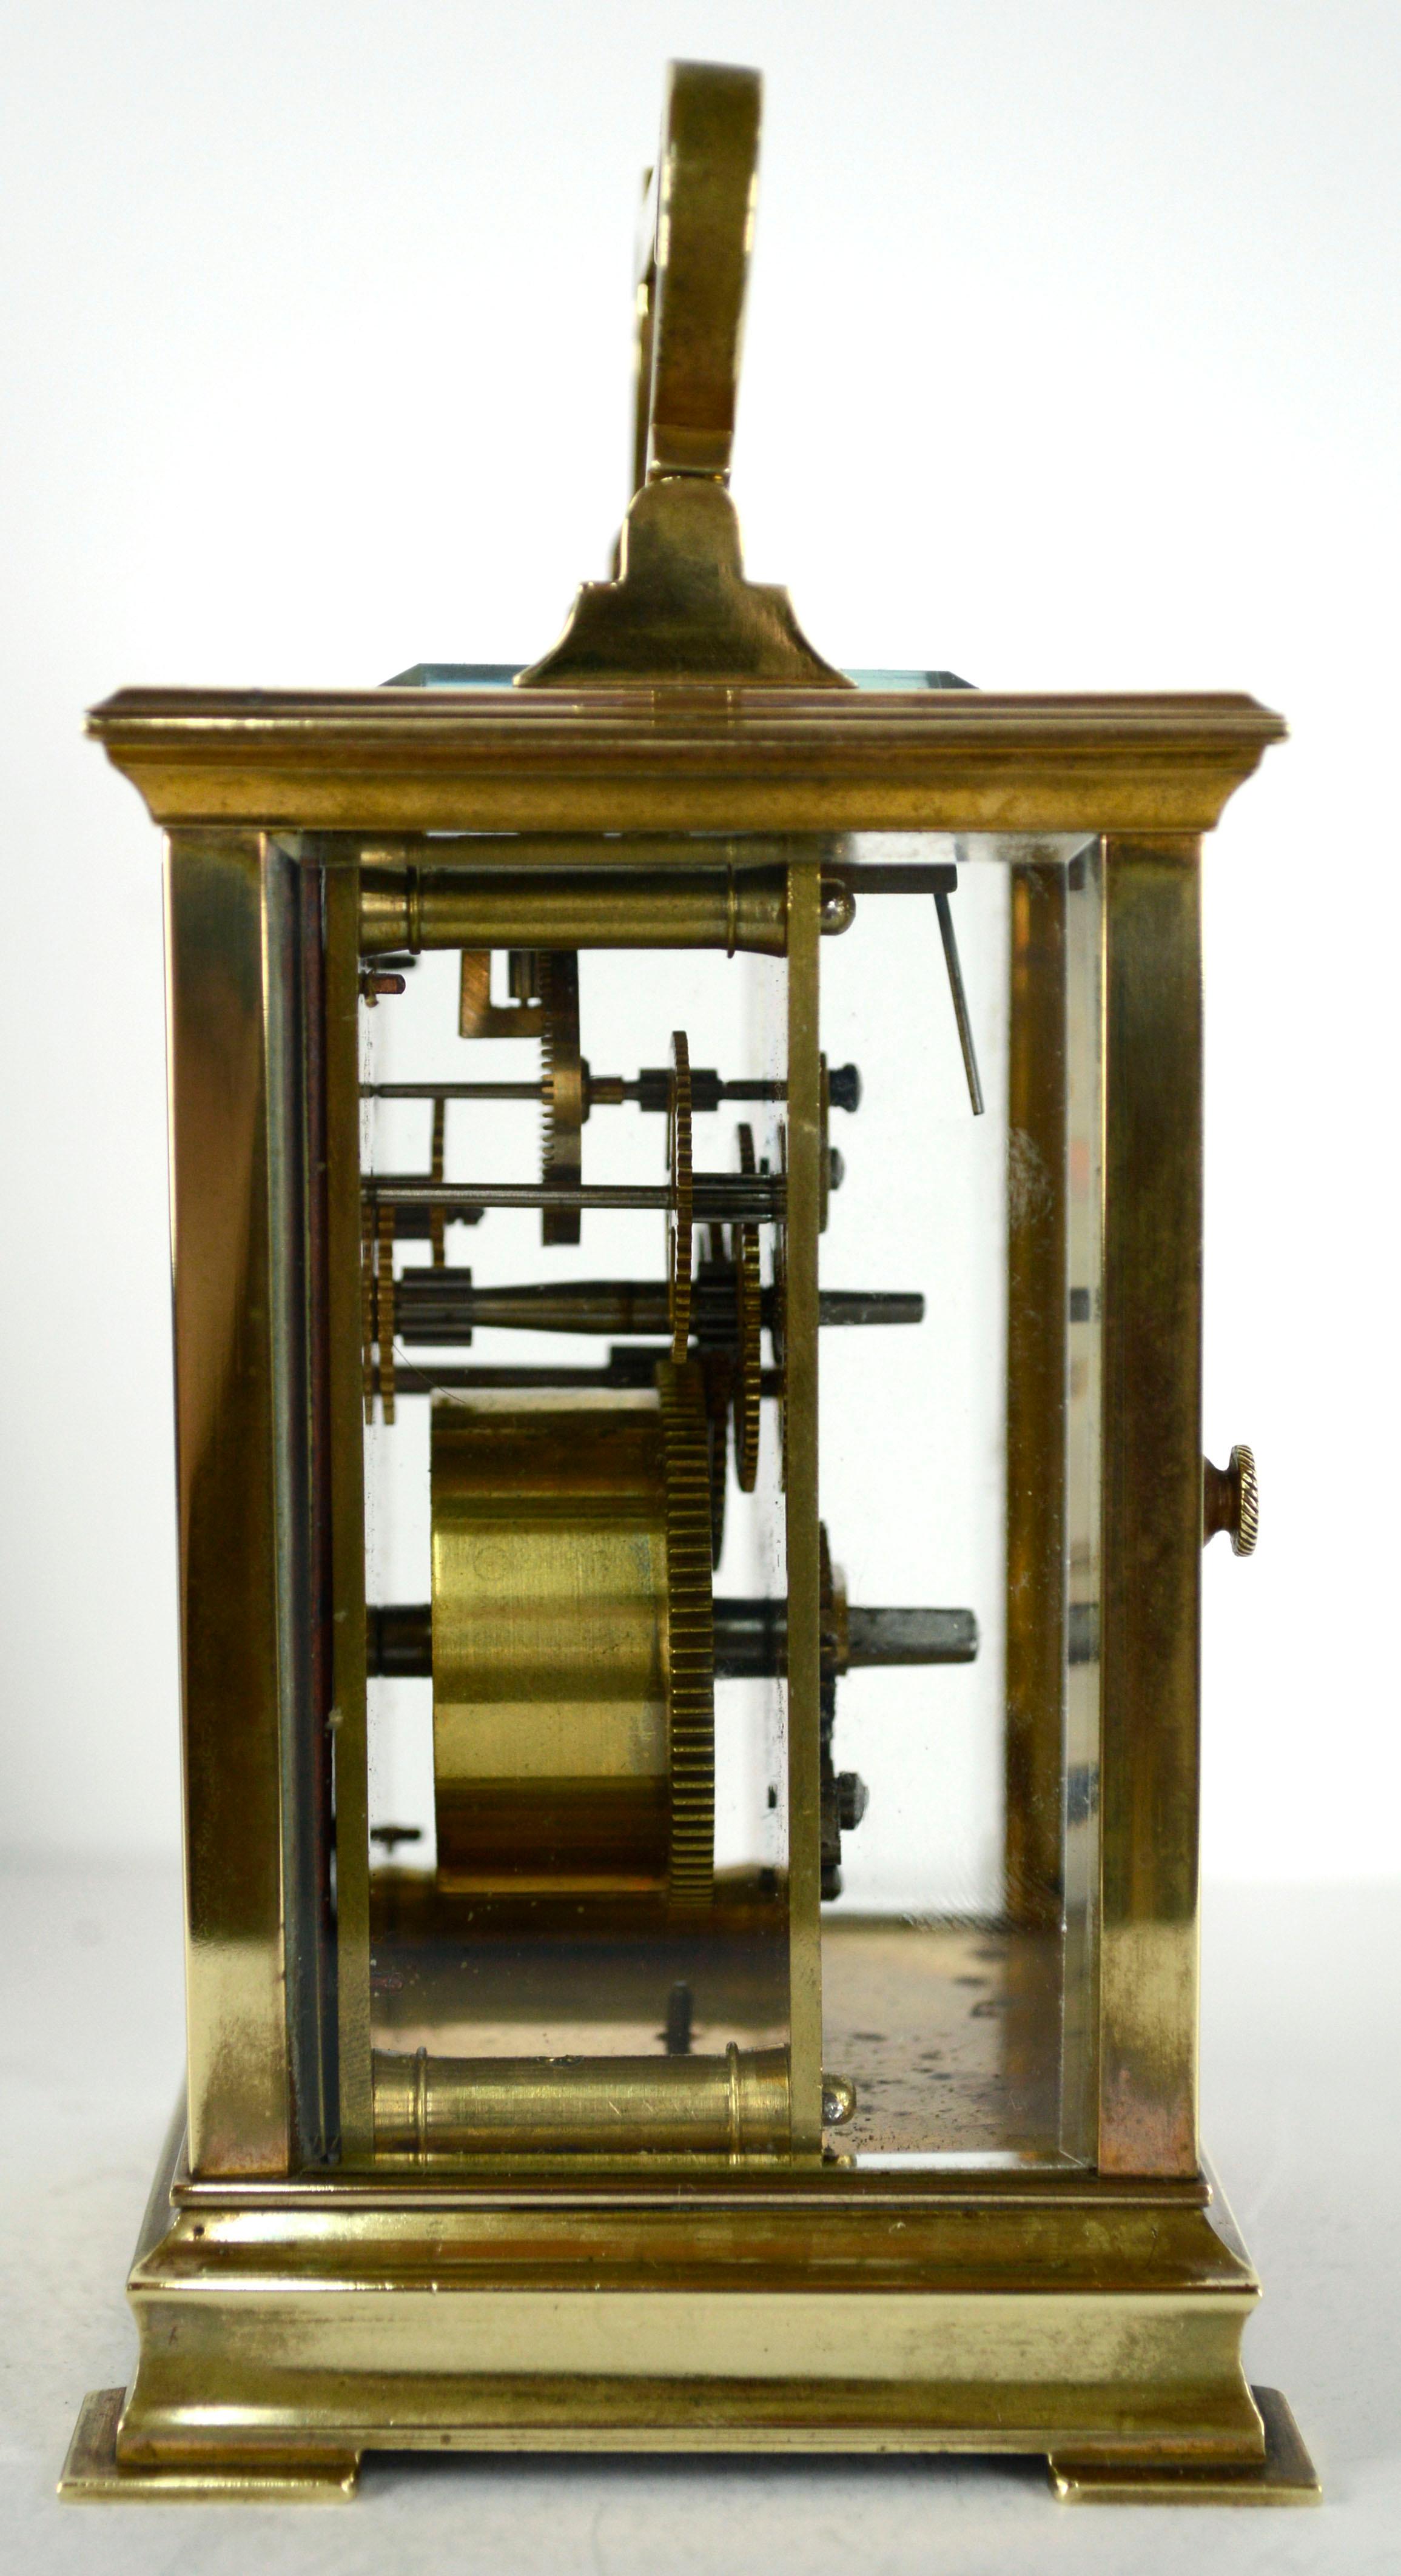 French Couaillet Freres Carriage Clock of Saint-Nicolas-D'Aliermont, Russell's 4